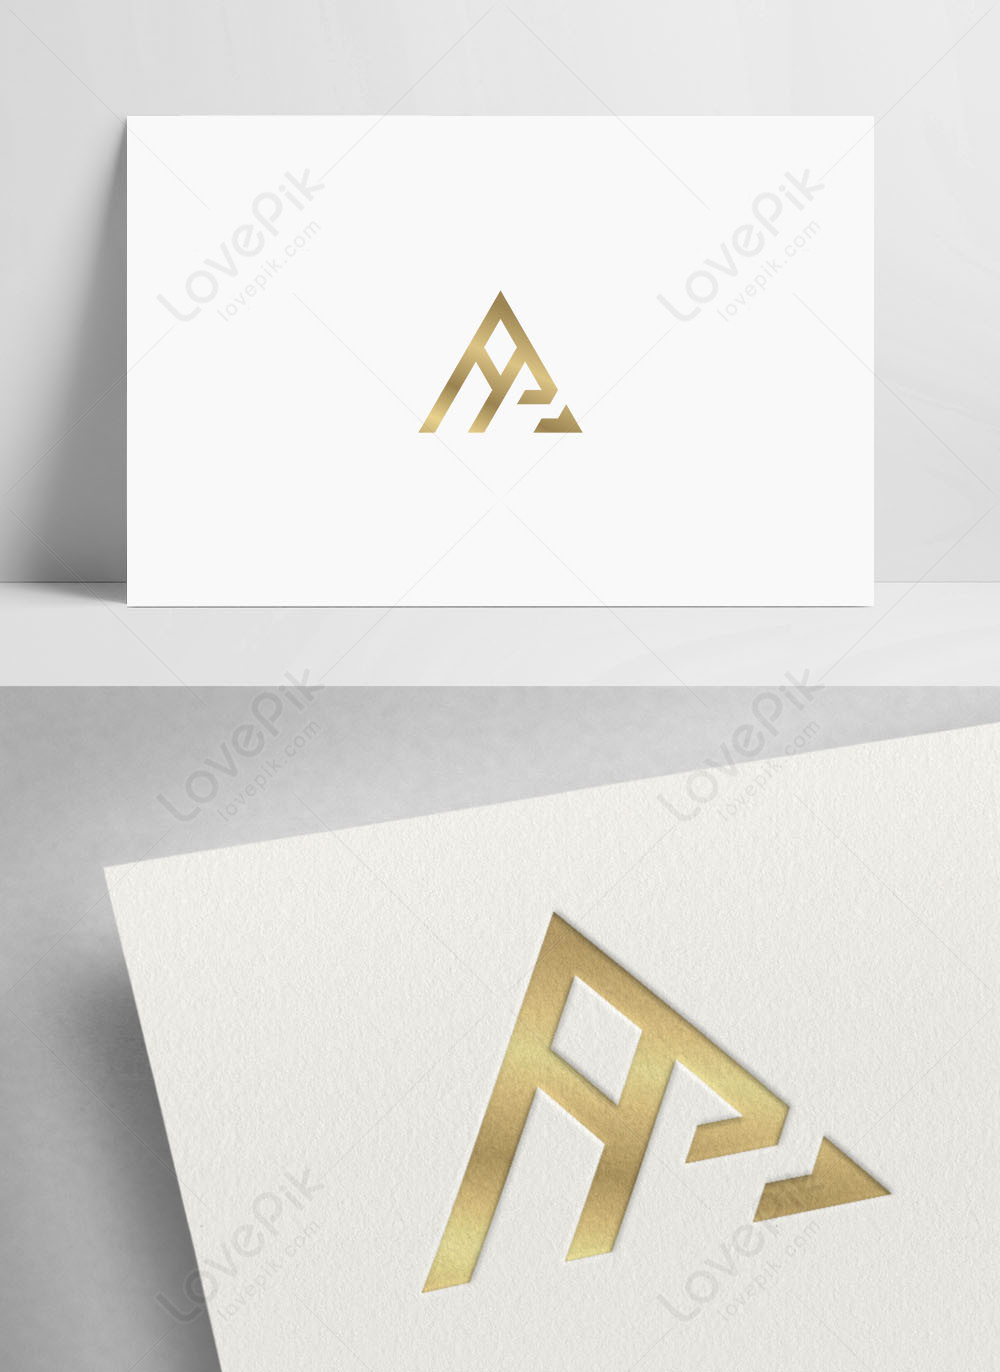 AA Logo Design Vector Graphic by xcoolee · Creative Fabrica